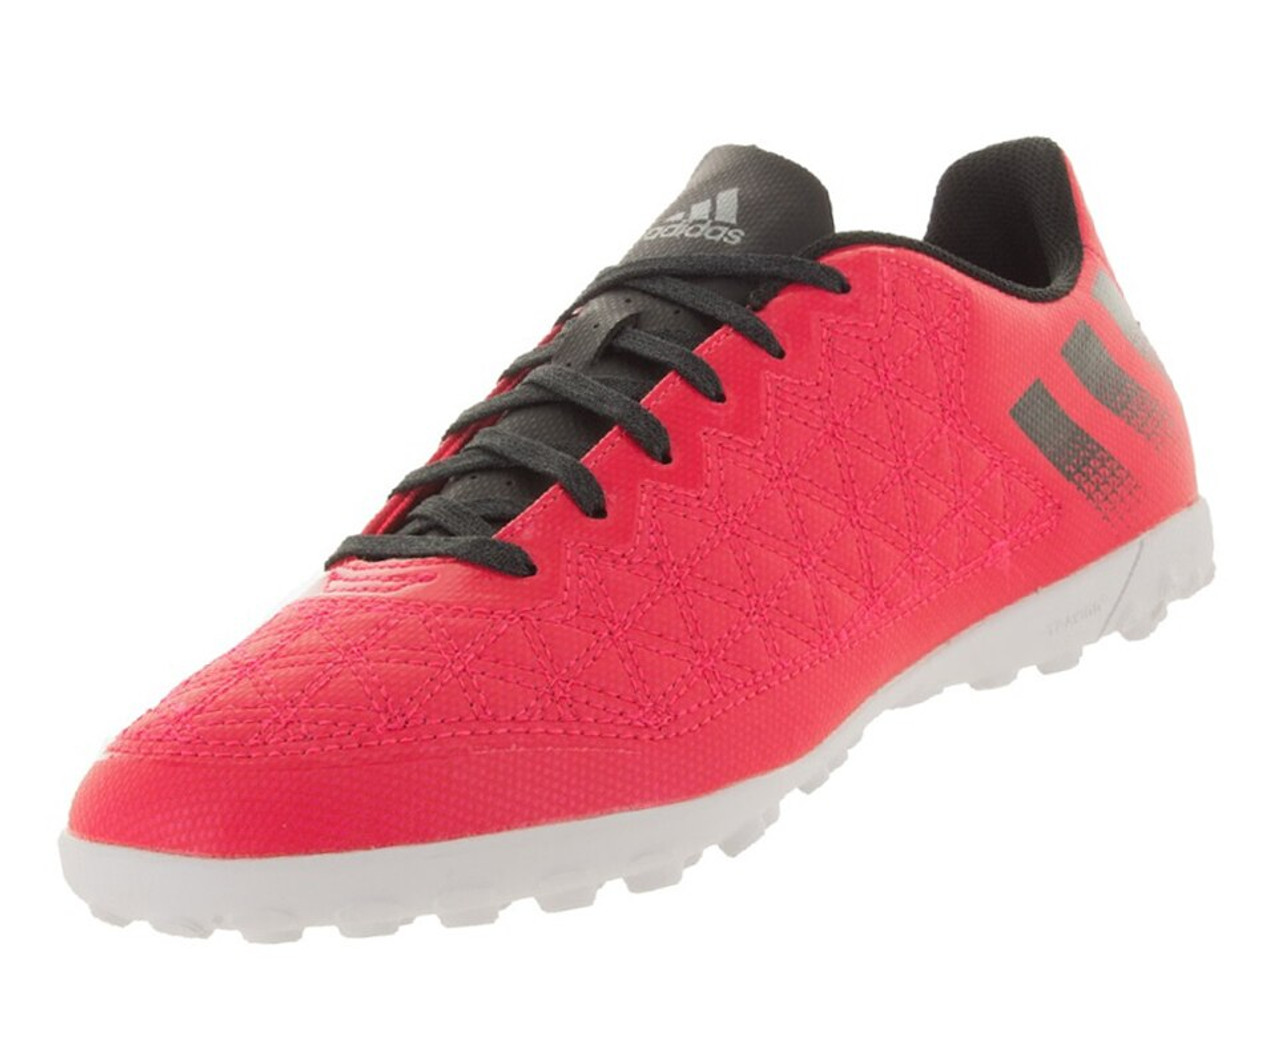 Adidas ACE Cage Shoes - Shock Red/Black/Crystal White- (072222) - ohp soccer